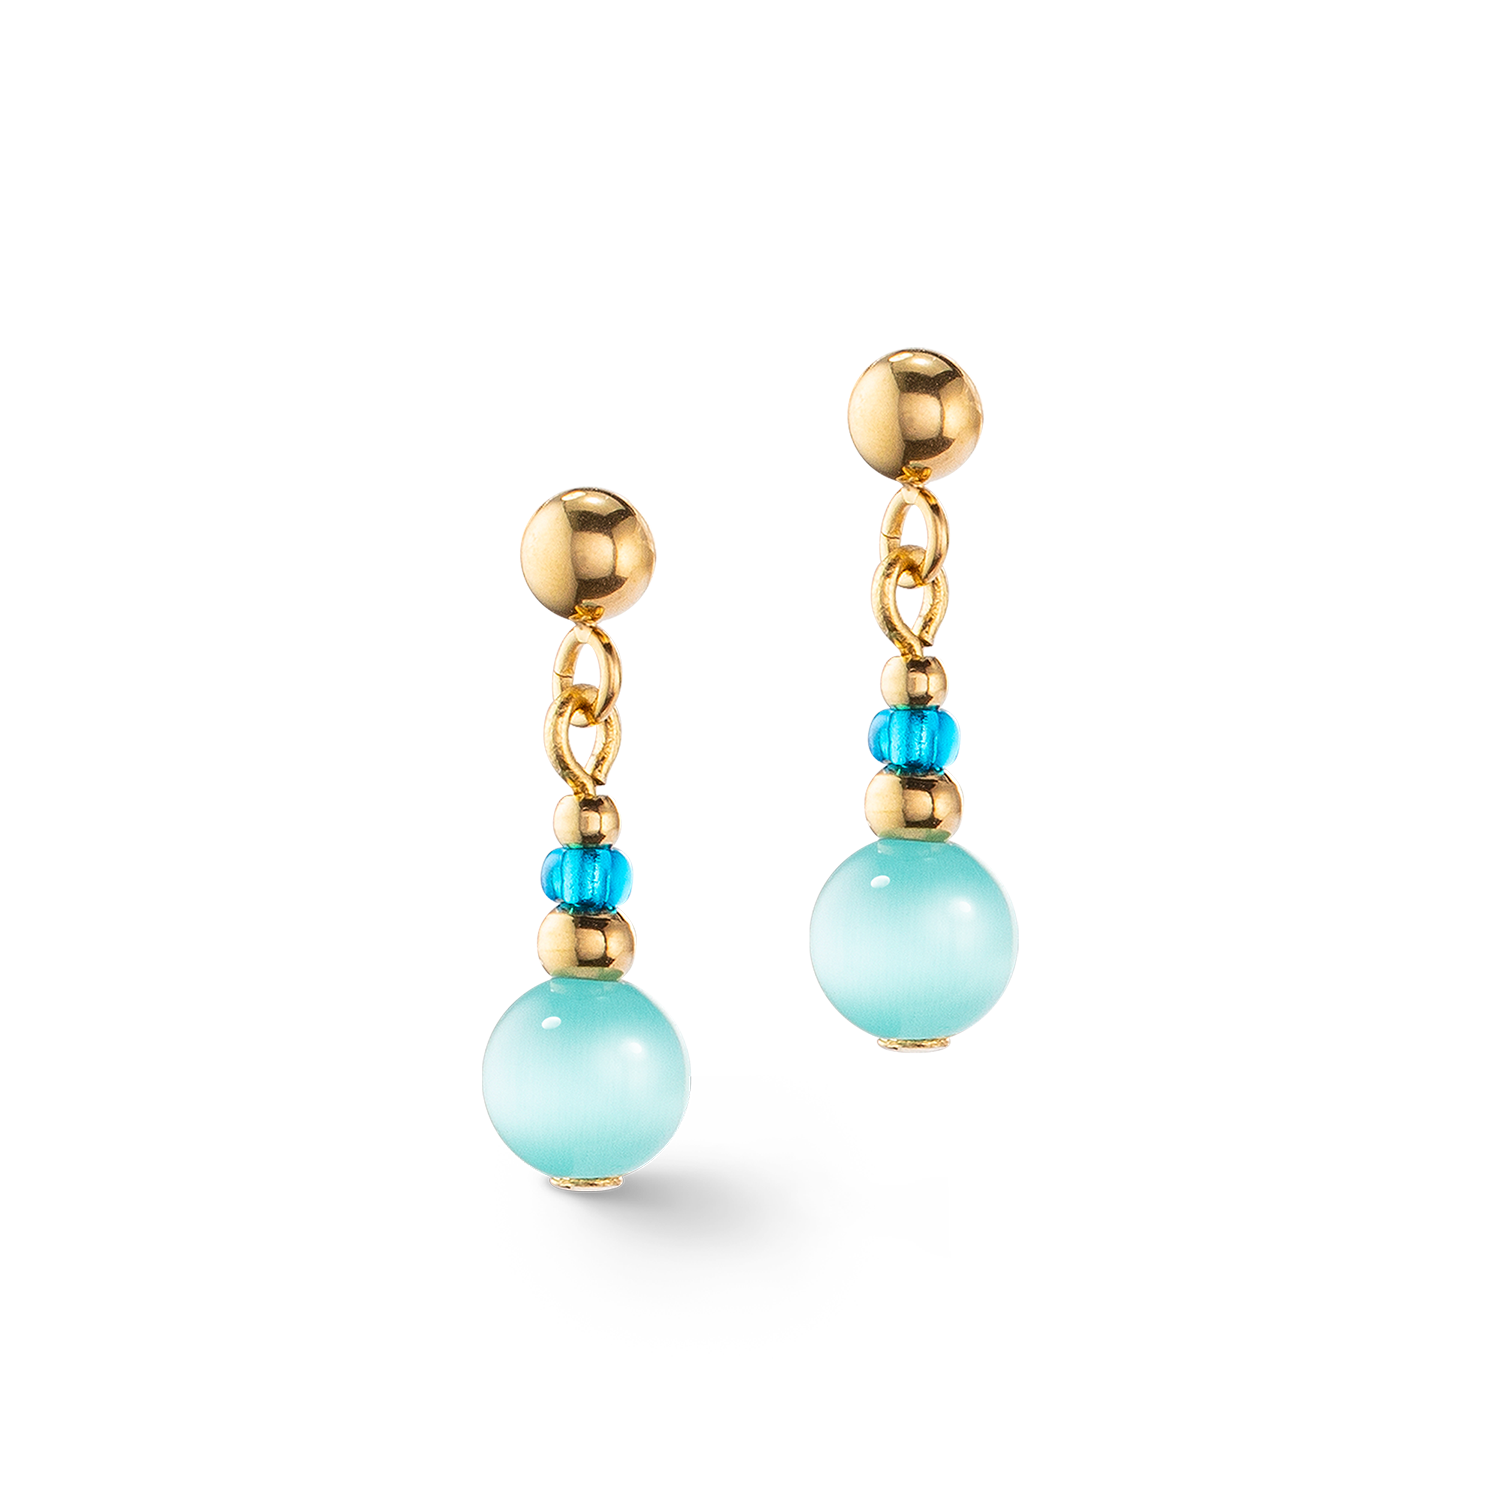 Boucles d'oreilles Candy Spheres turquoise